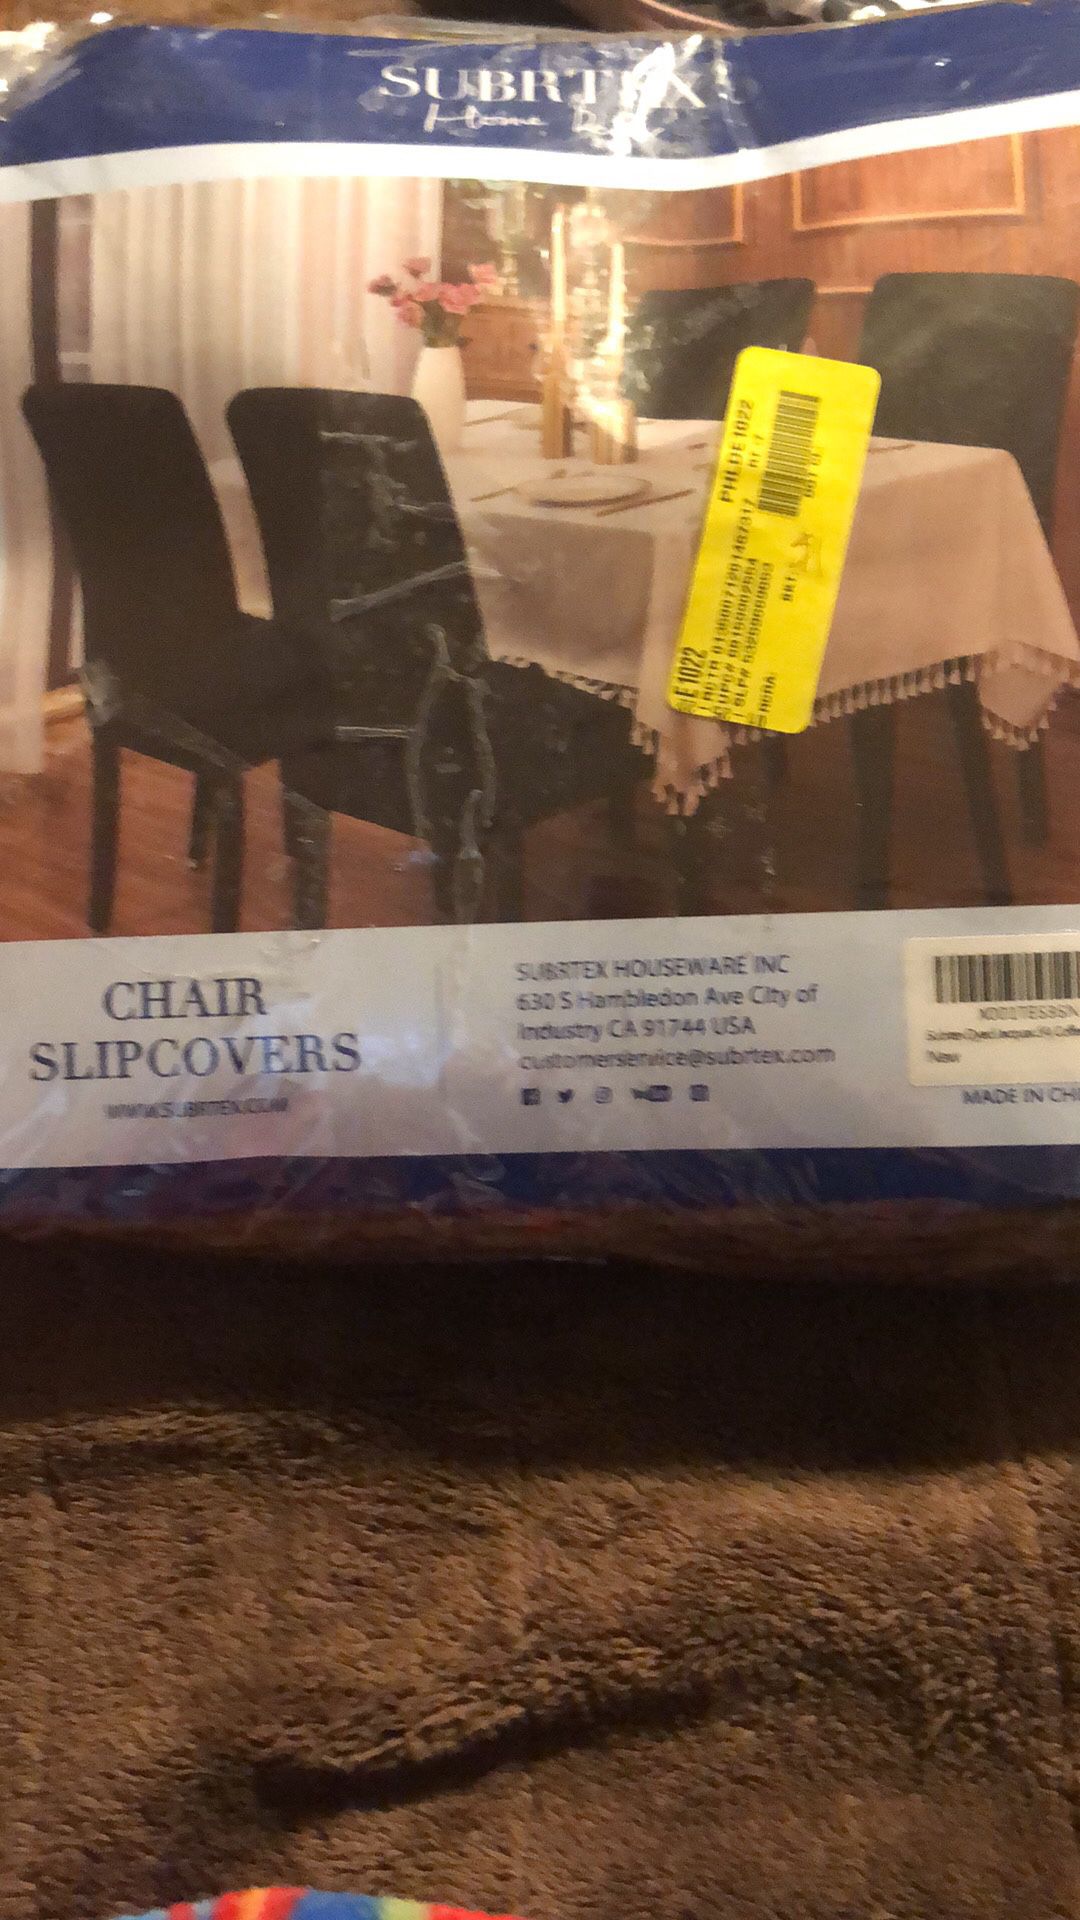 Chair slip covers